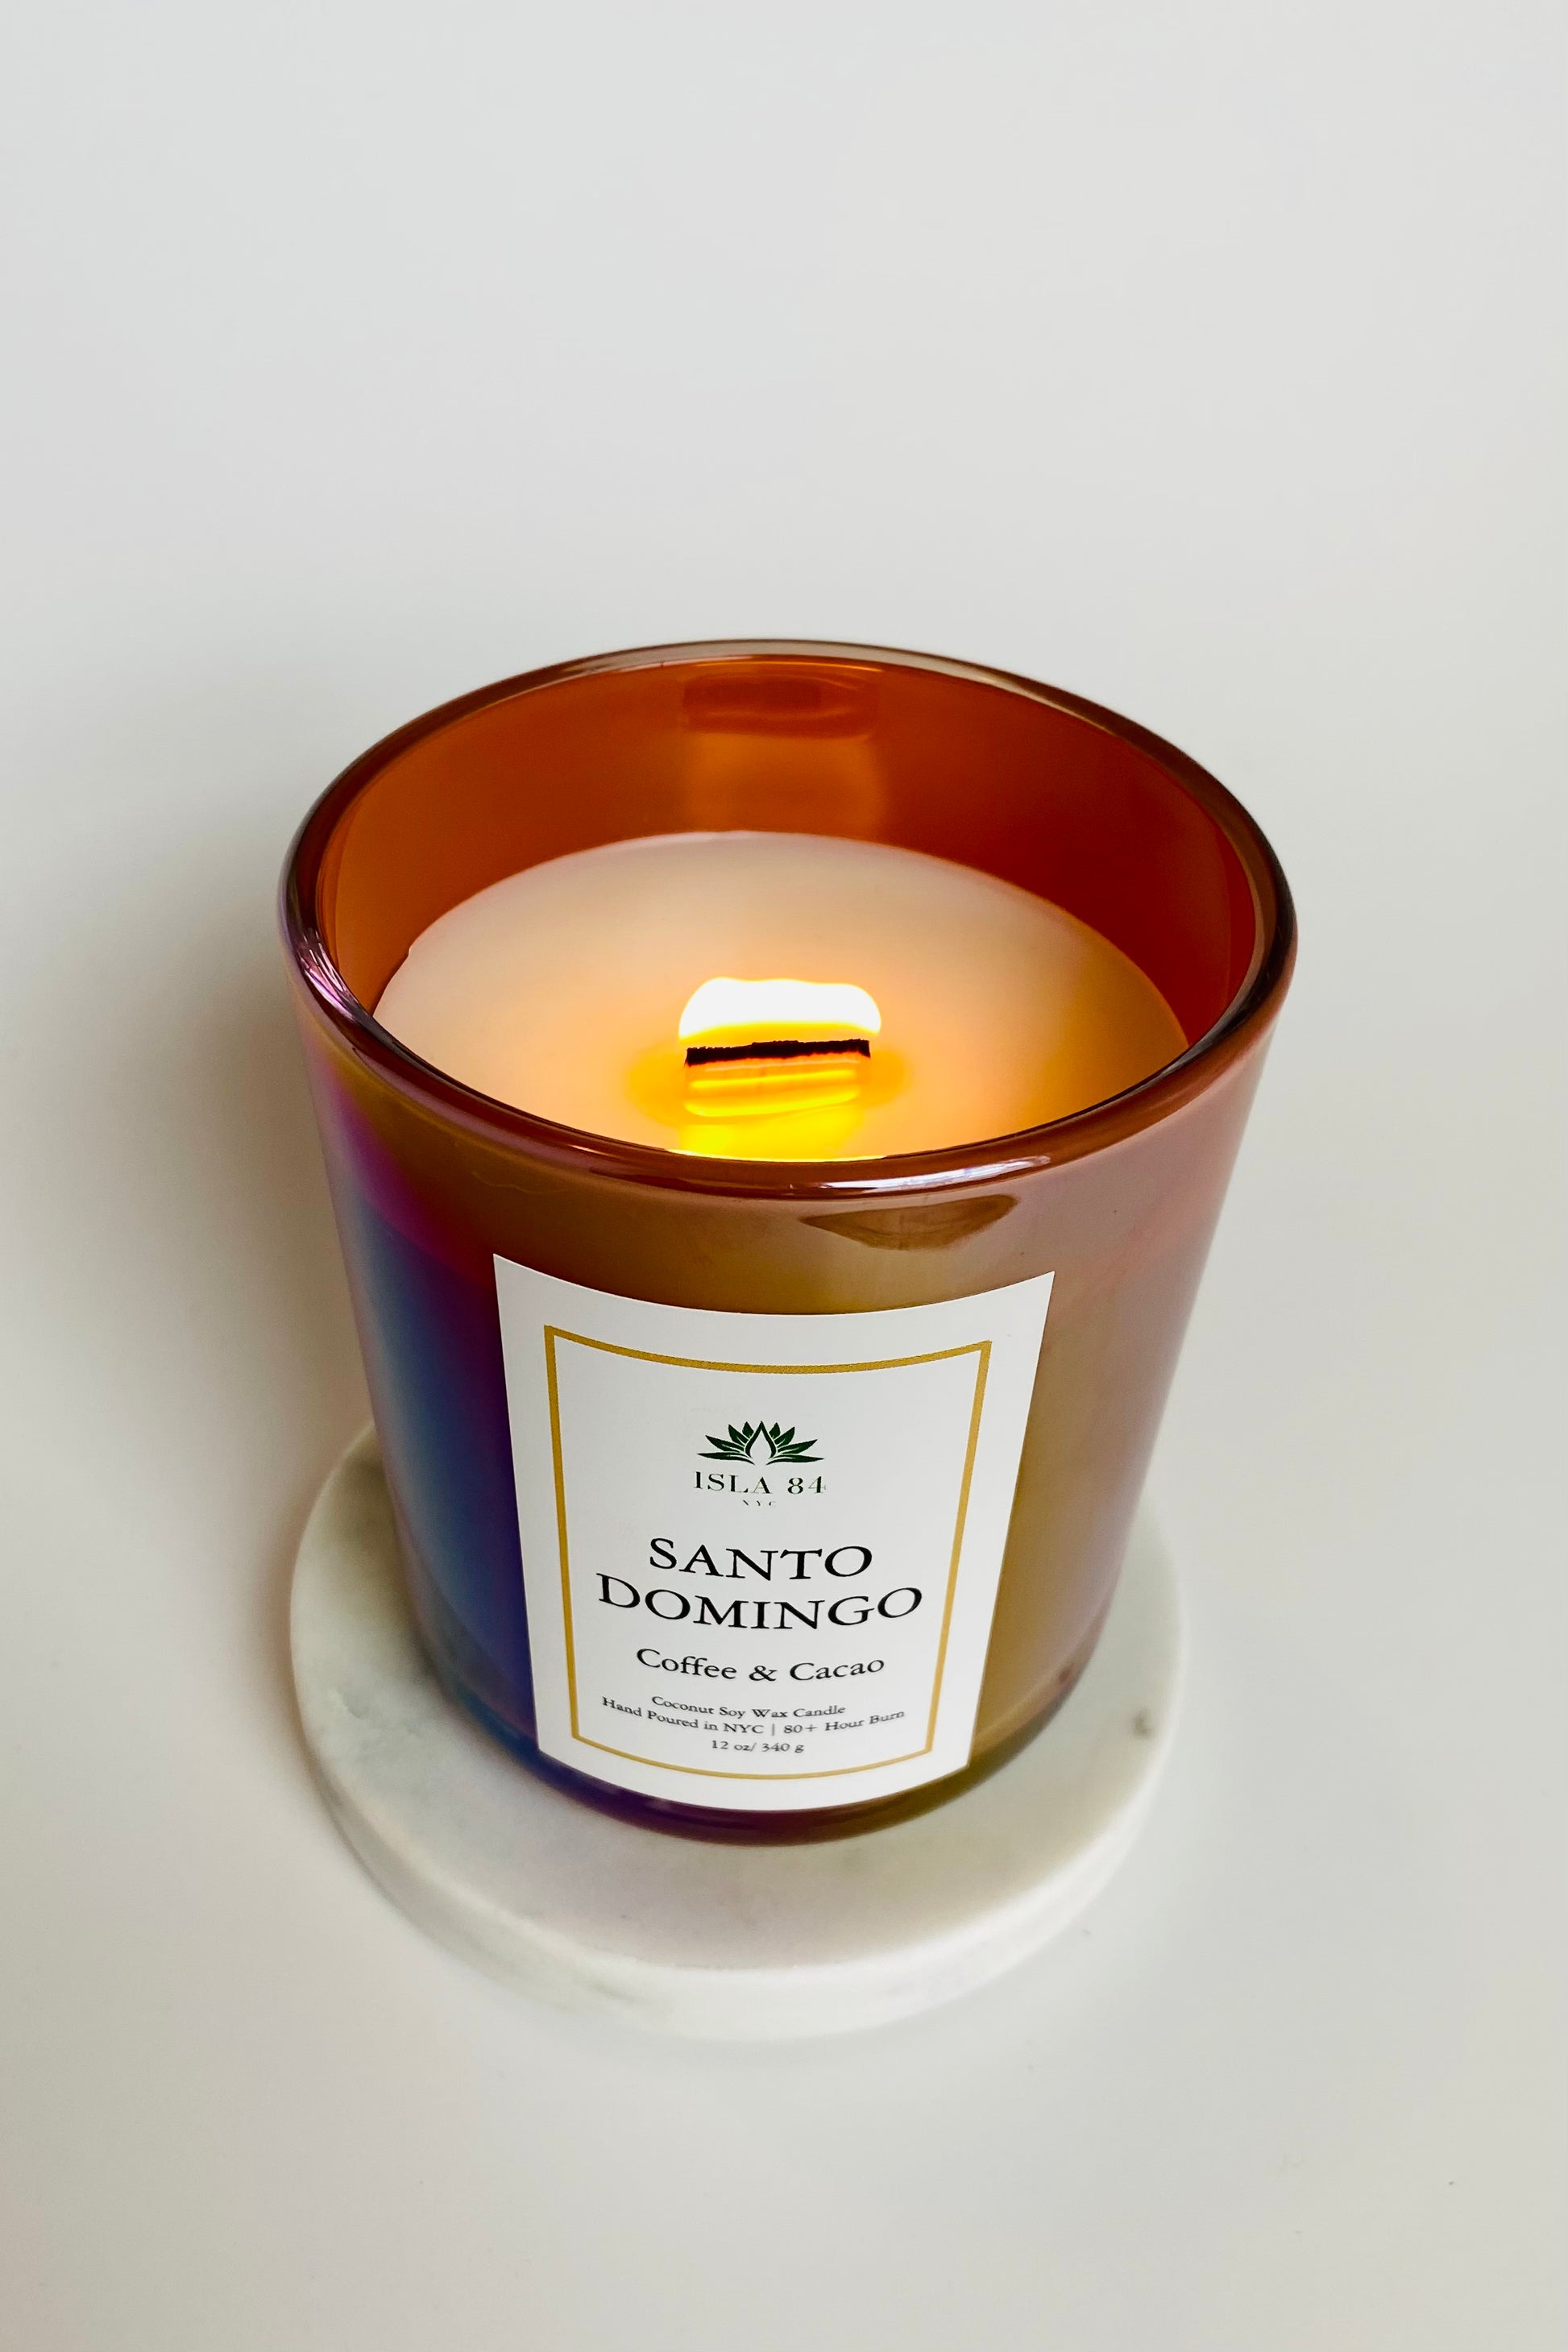 Santo Domingo Scented Candle; Saint Sunday; Dominican Republic Candles; DR Candles; Quisqueya Candles; Velas aromaticas; Coconut Soy Wax Candles; Iridescent Brown Vessel with White label and green logo; Burning wood wick